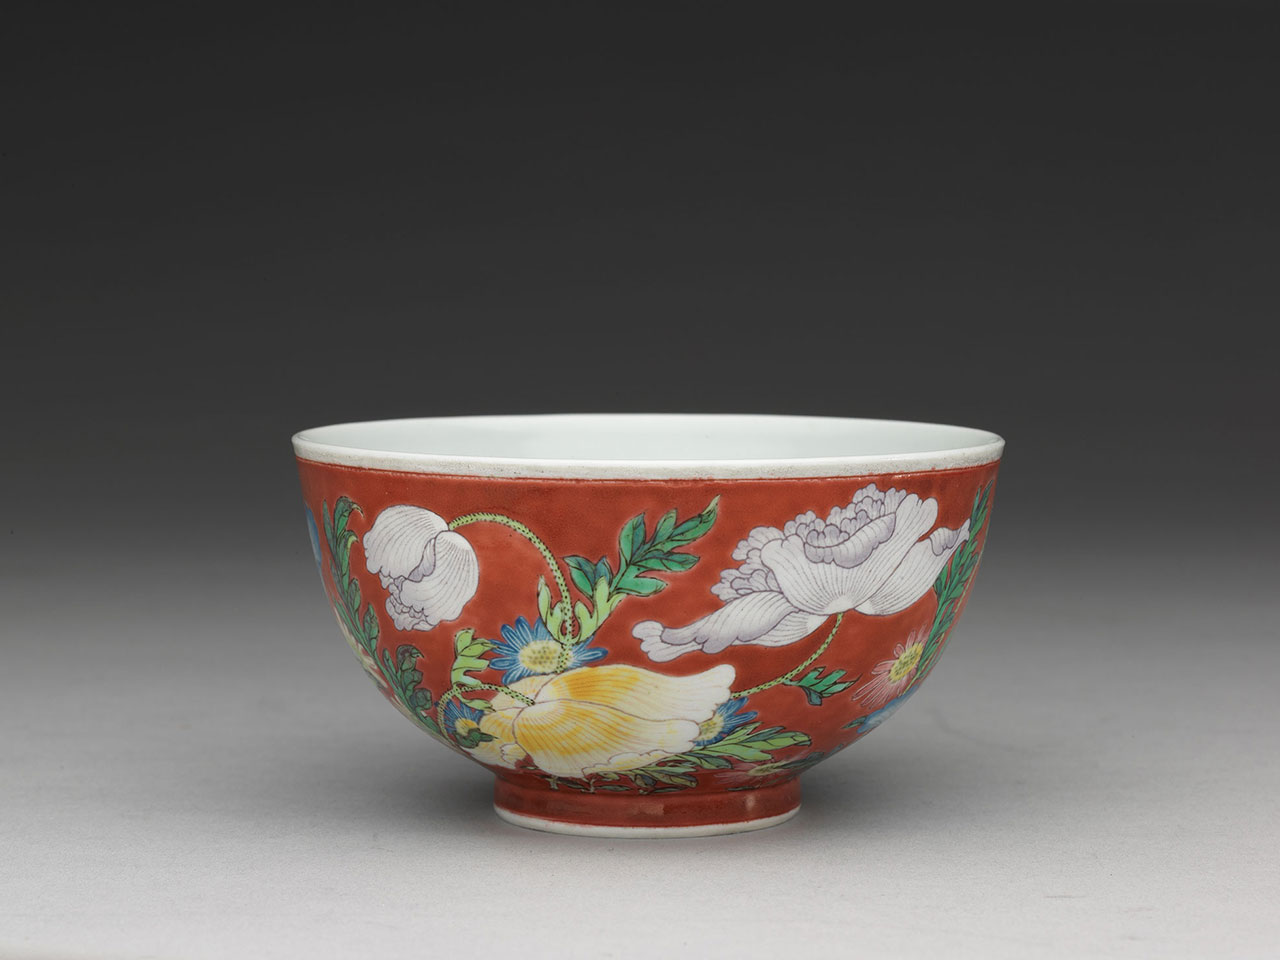 Bowl with poppies on a red ground in painted enamels